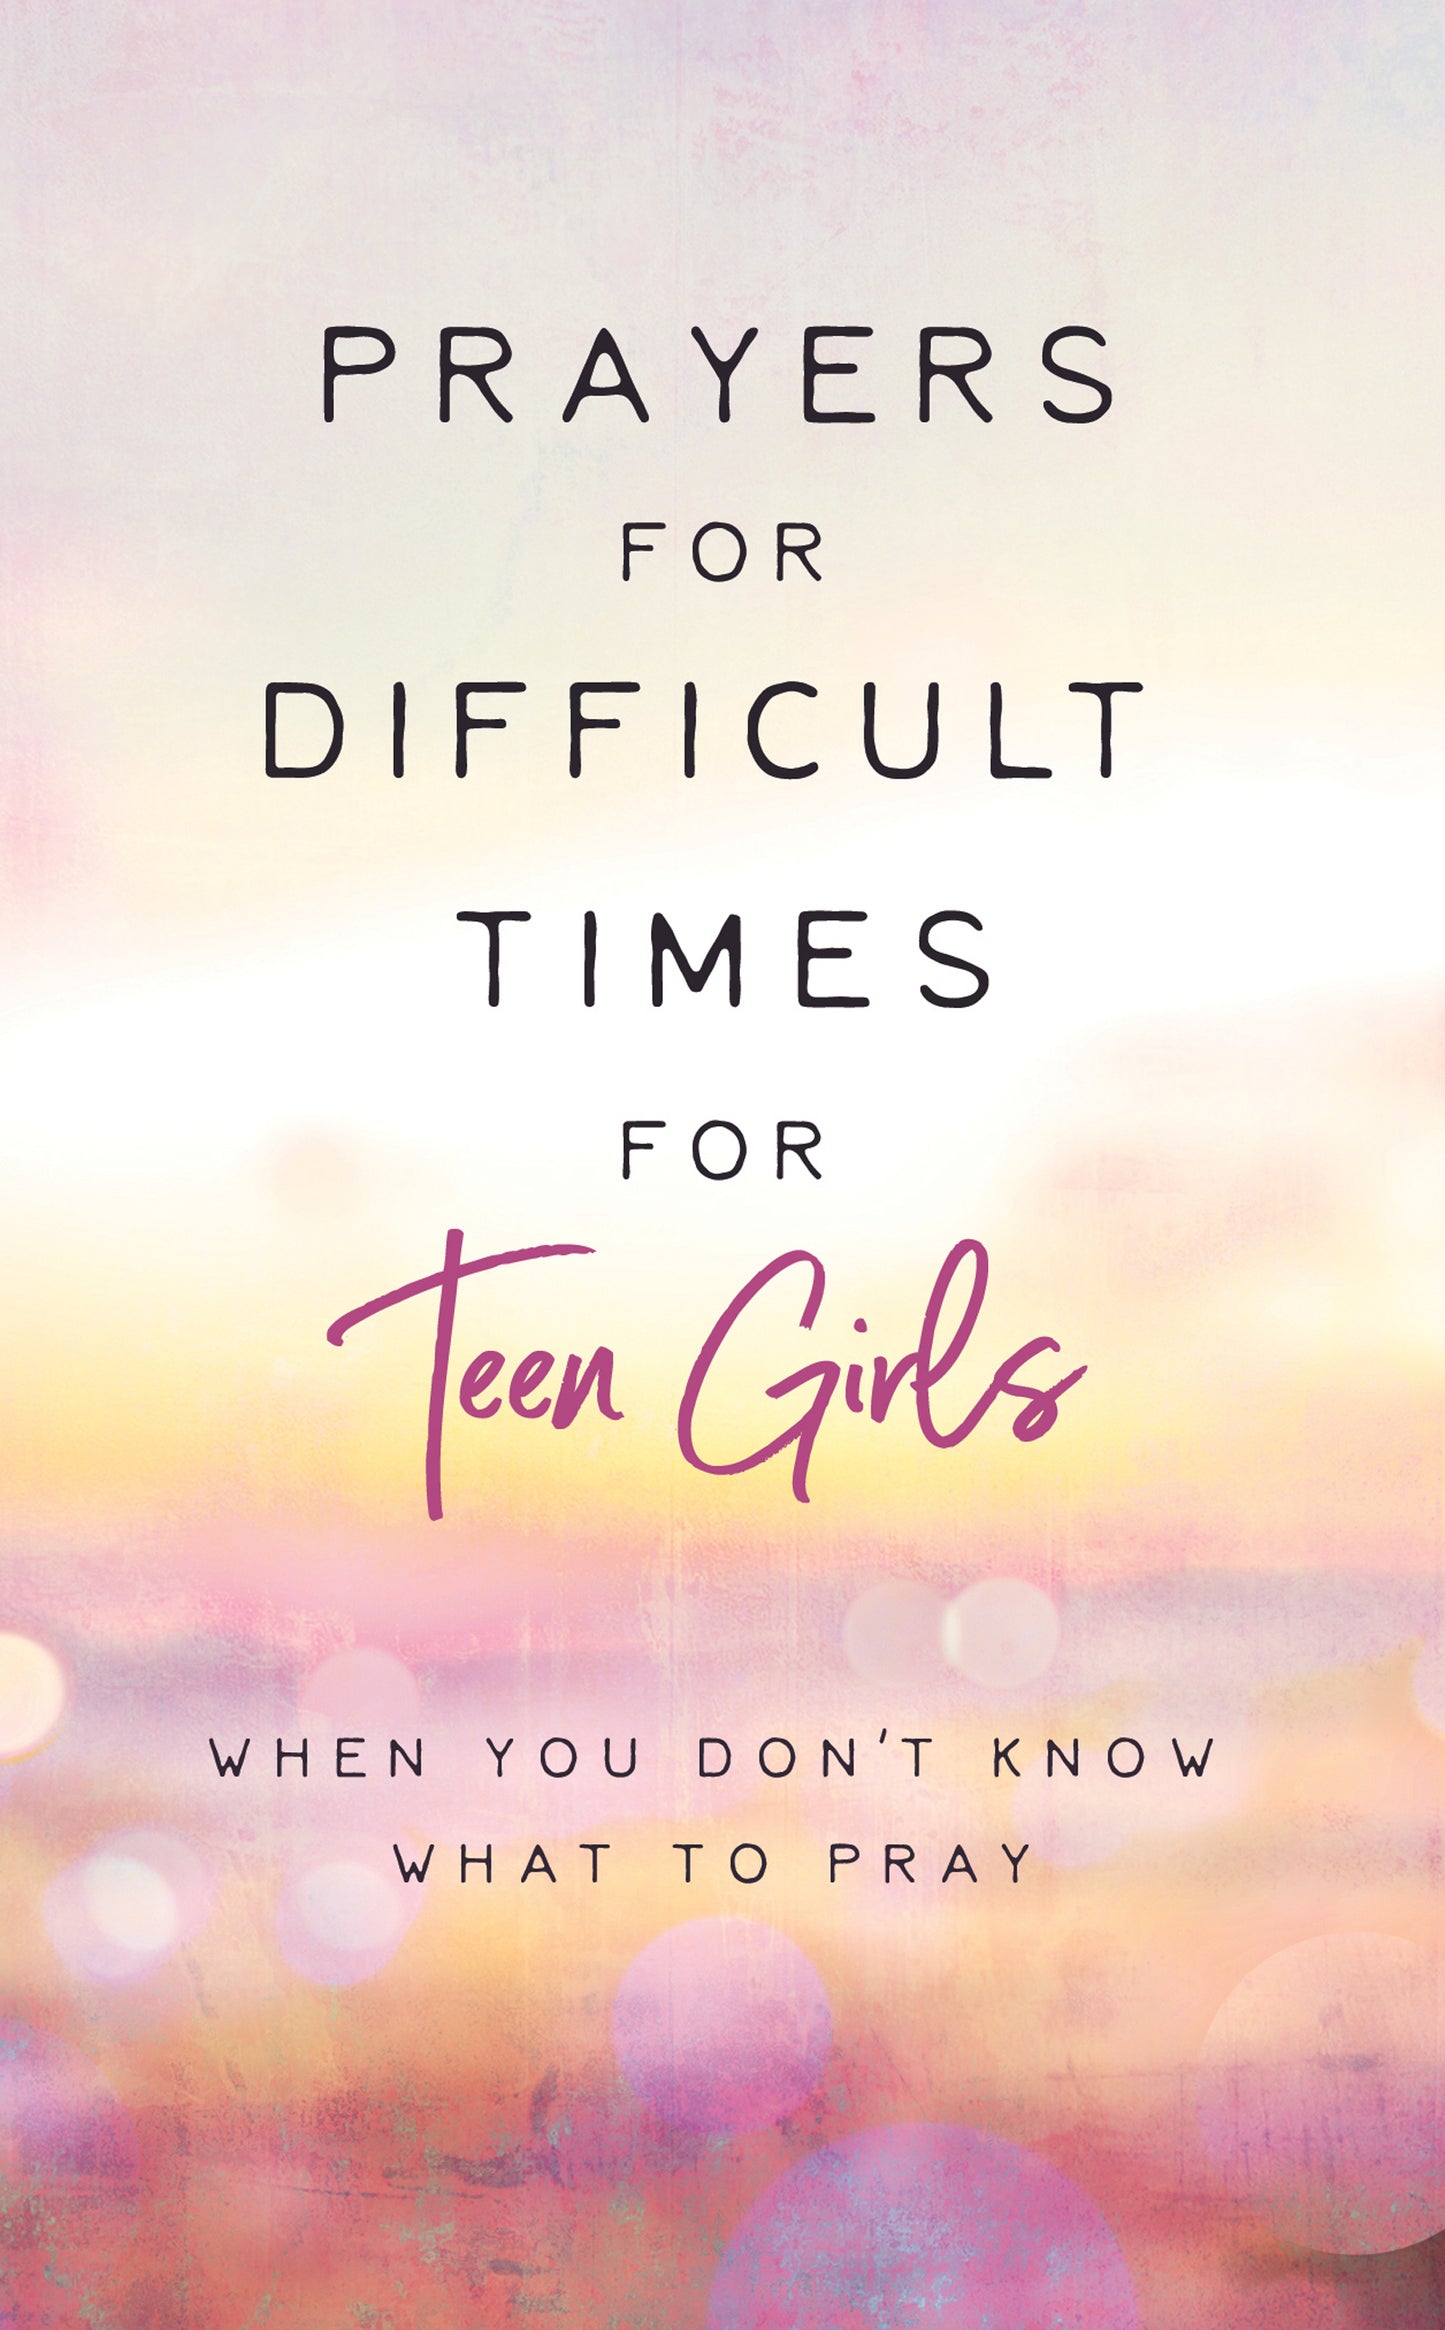 Prayers for Difficult Times for Teen Girls - The Christian Gift Company